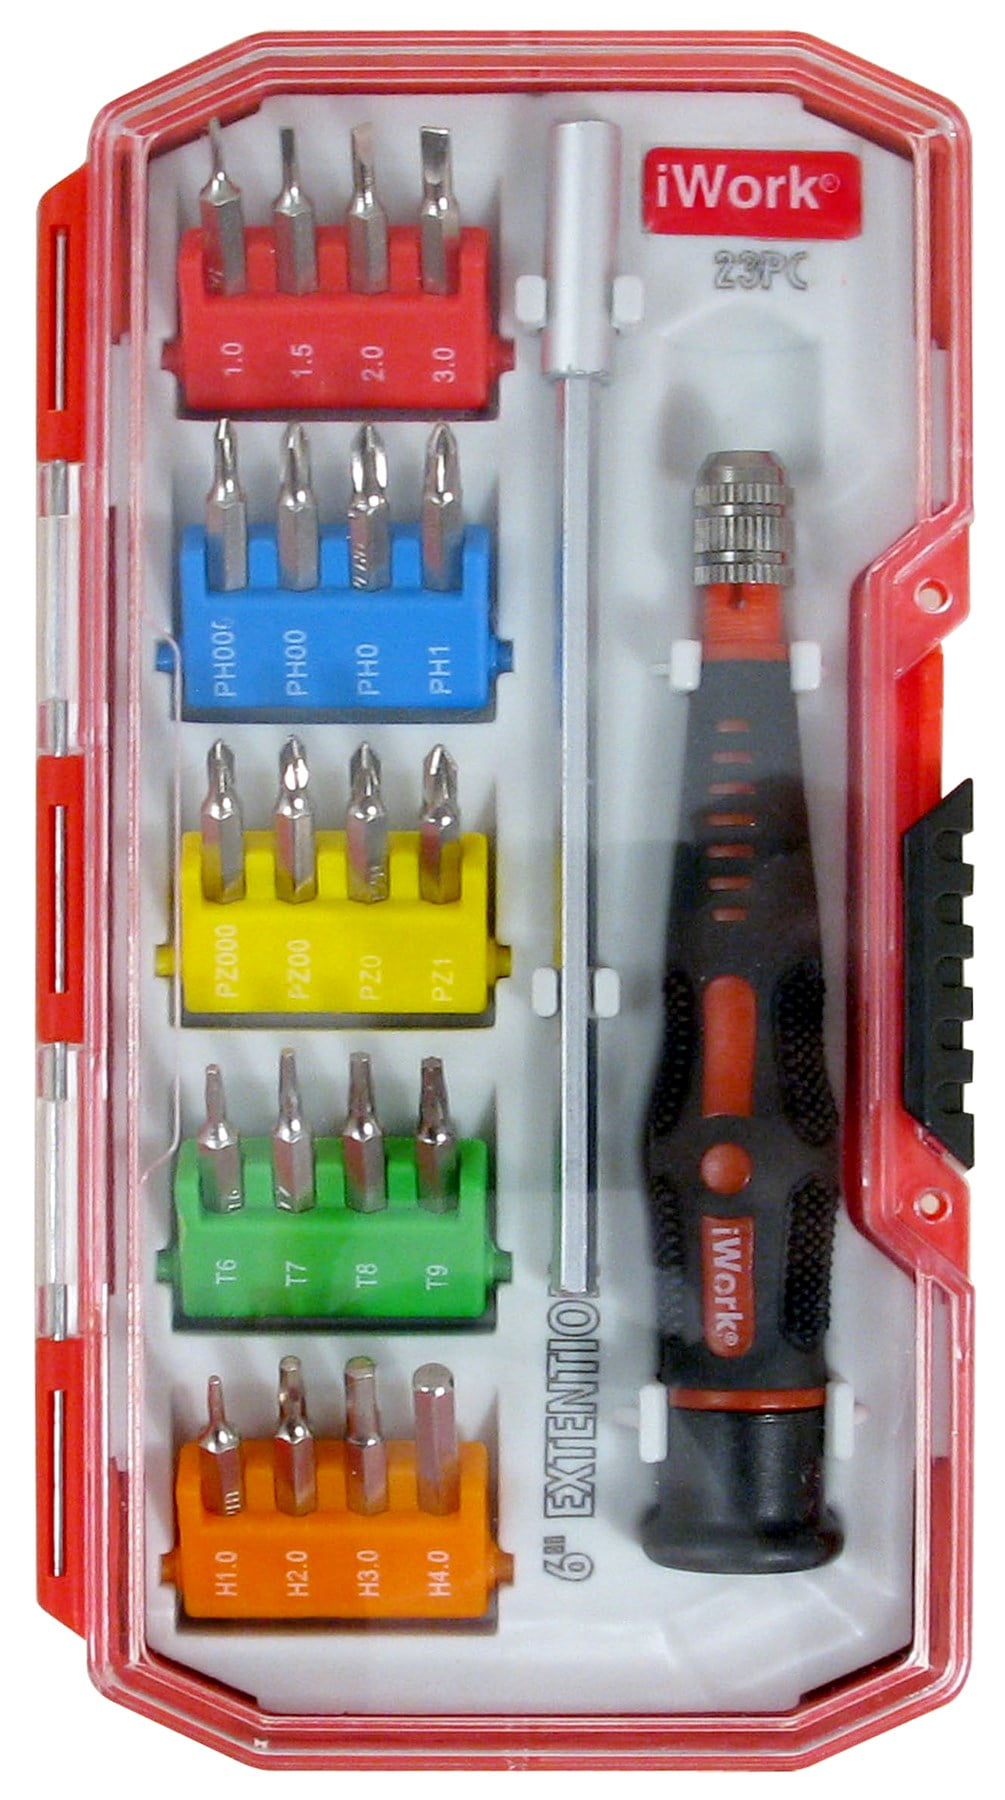 76-513-N12 24 Piece Olympia Tools iWork Drill and Driver Bits Set